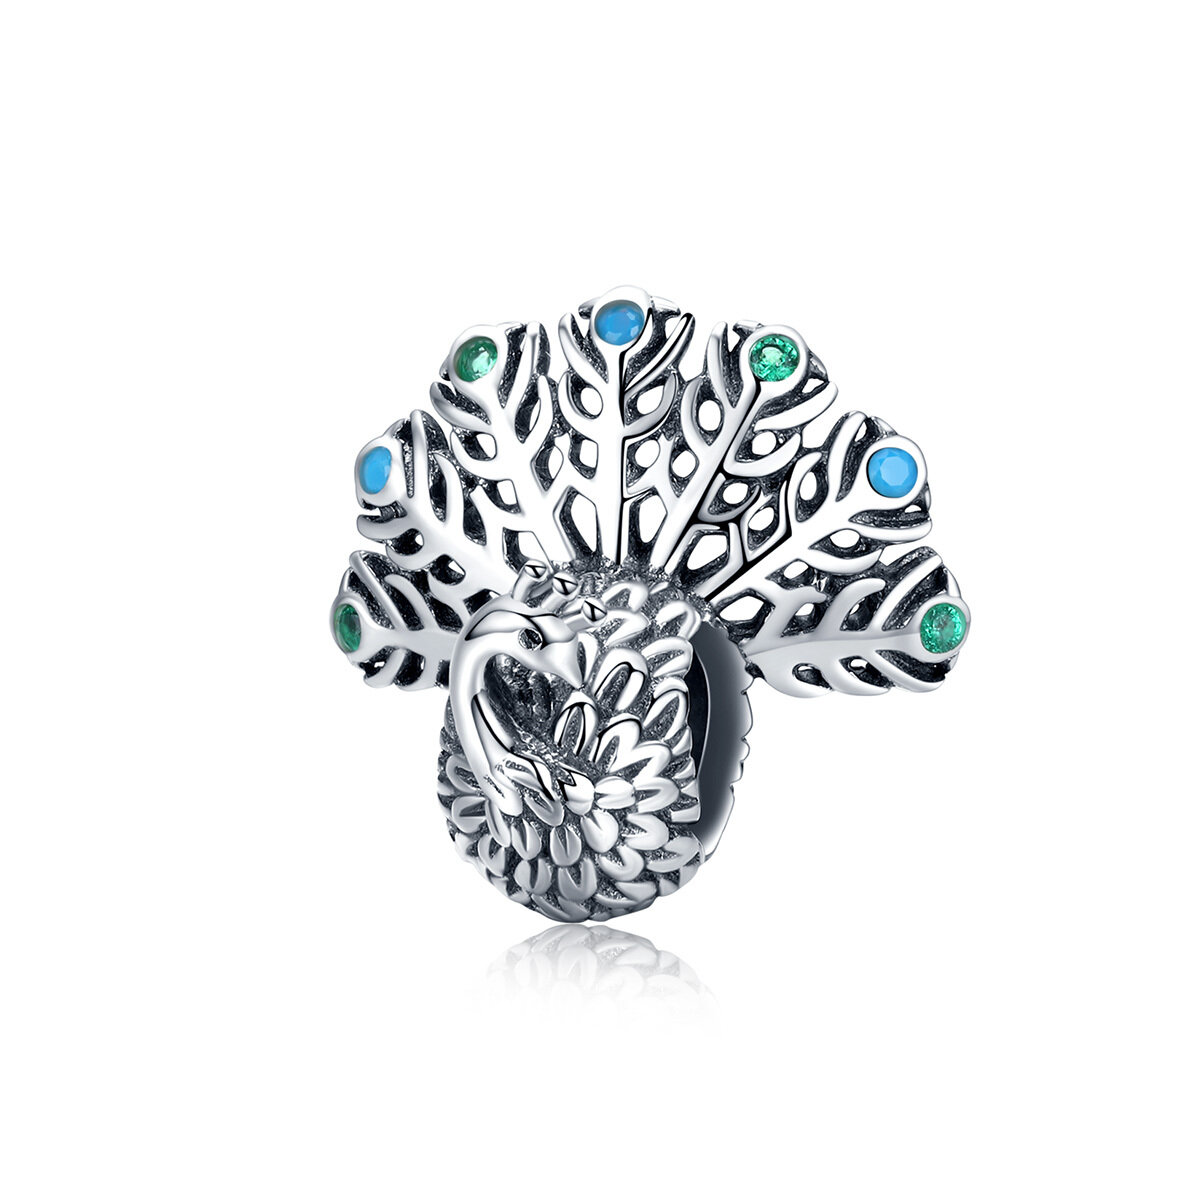 GemKing SCC1260 Peacock S925 Sterling Silver Charm